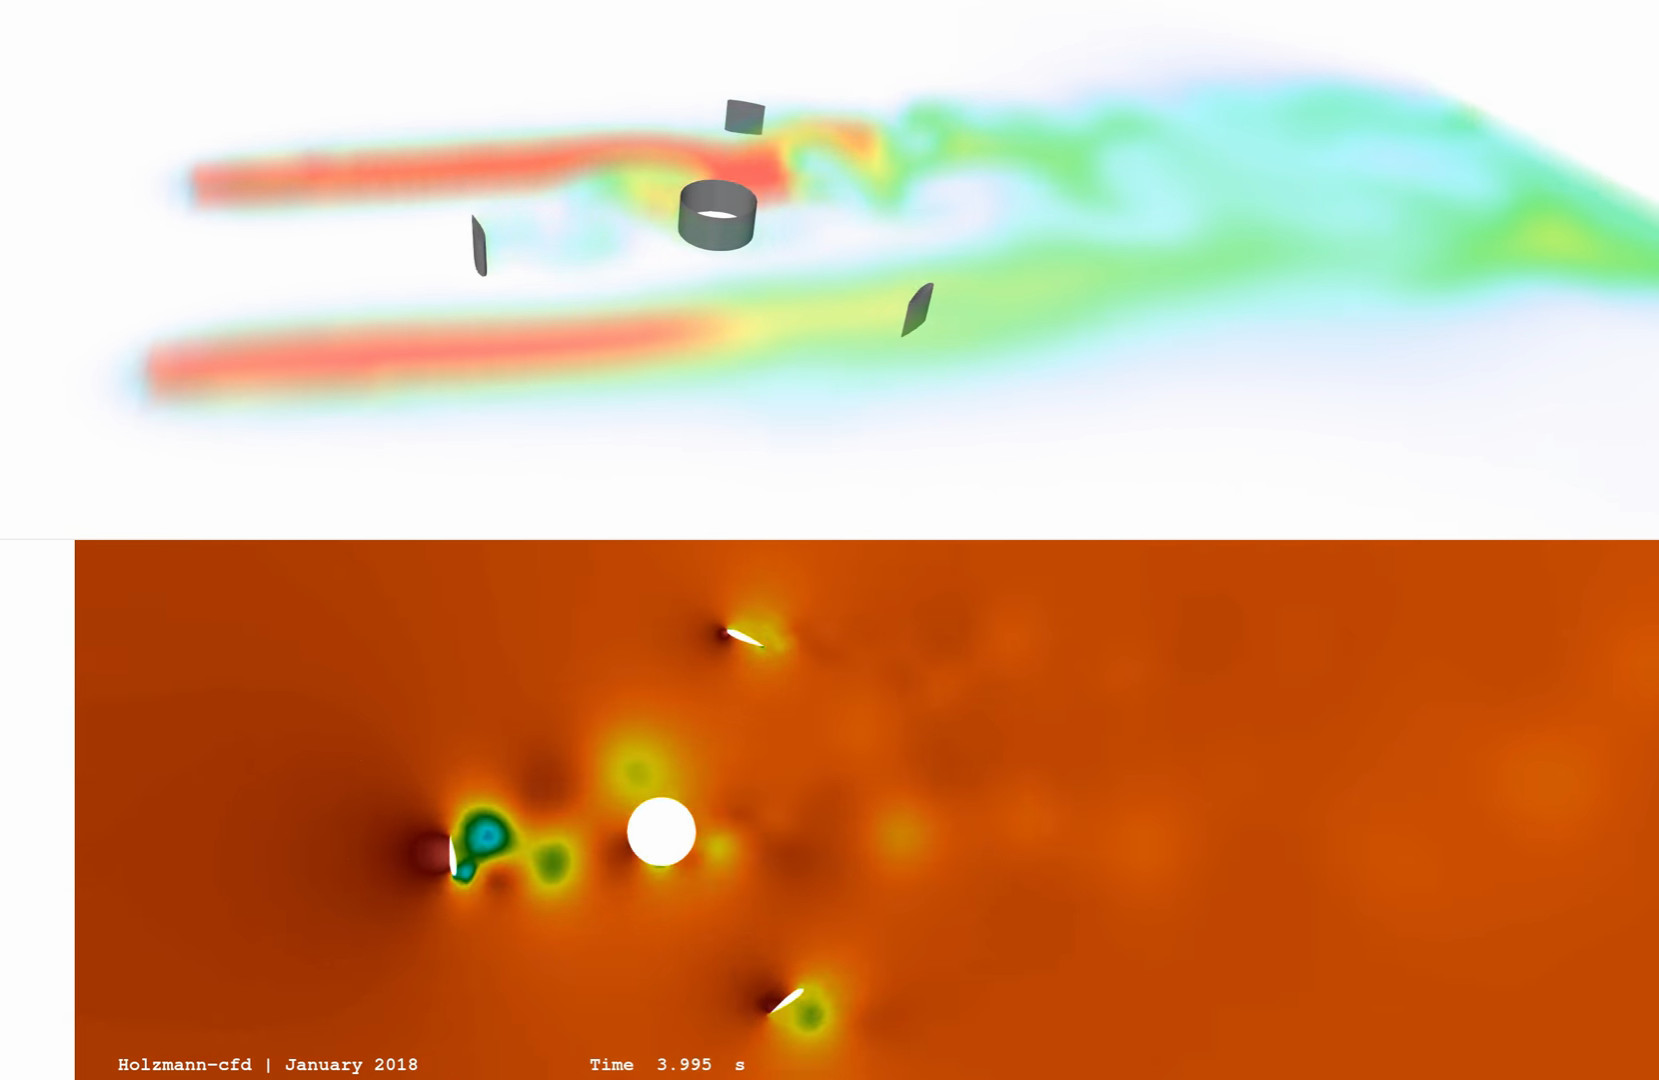 Image: CFD analysis including pressure field and passive scalar